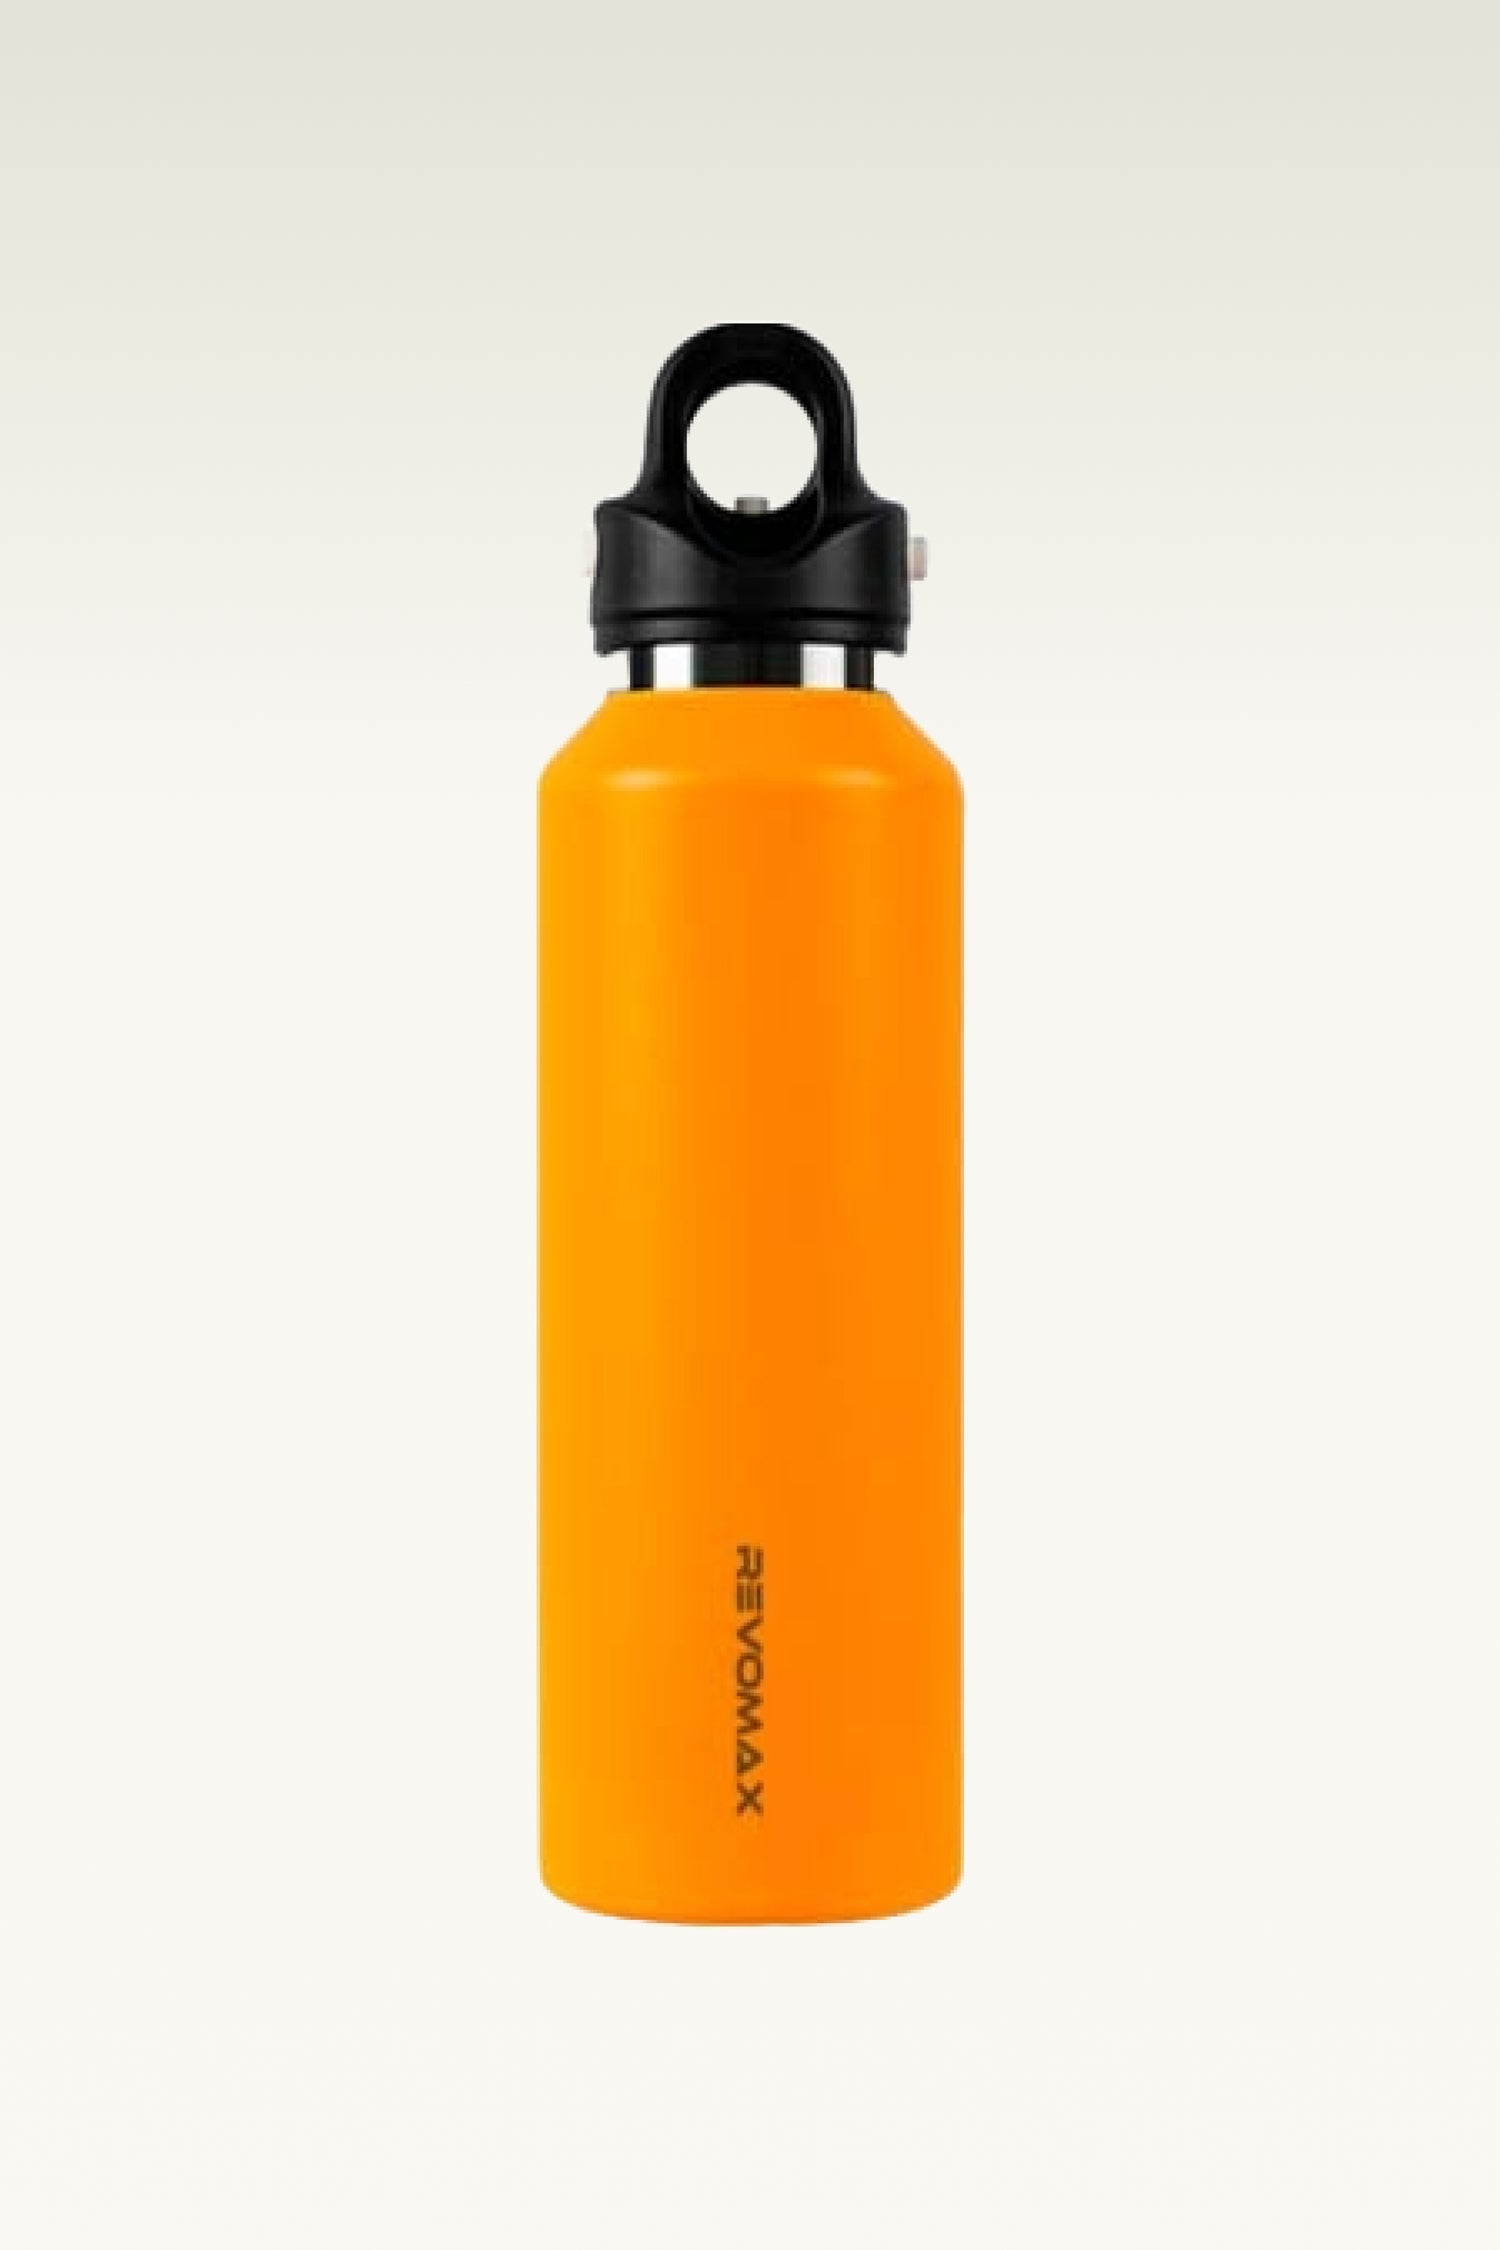 Hikesity's innovative, no-screw design, yellow 20oz water bottle; Open and close with one hand within 2 seconds. Easy to clean!